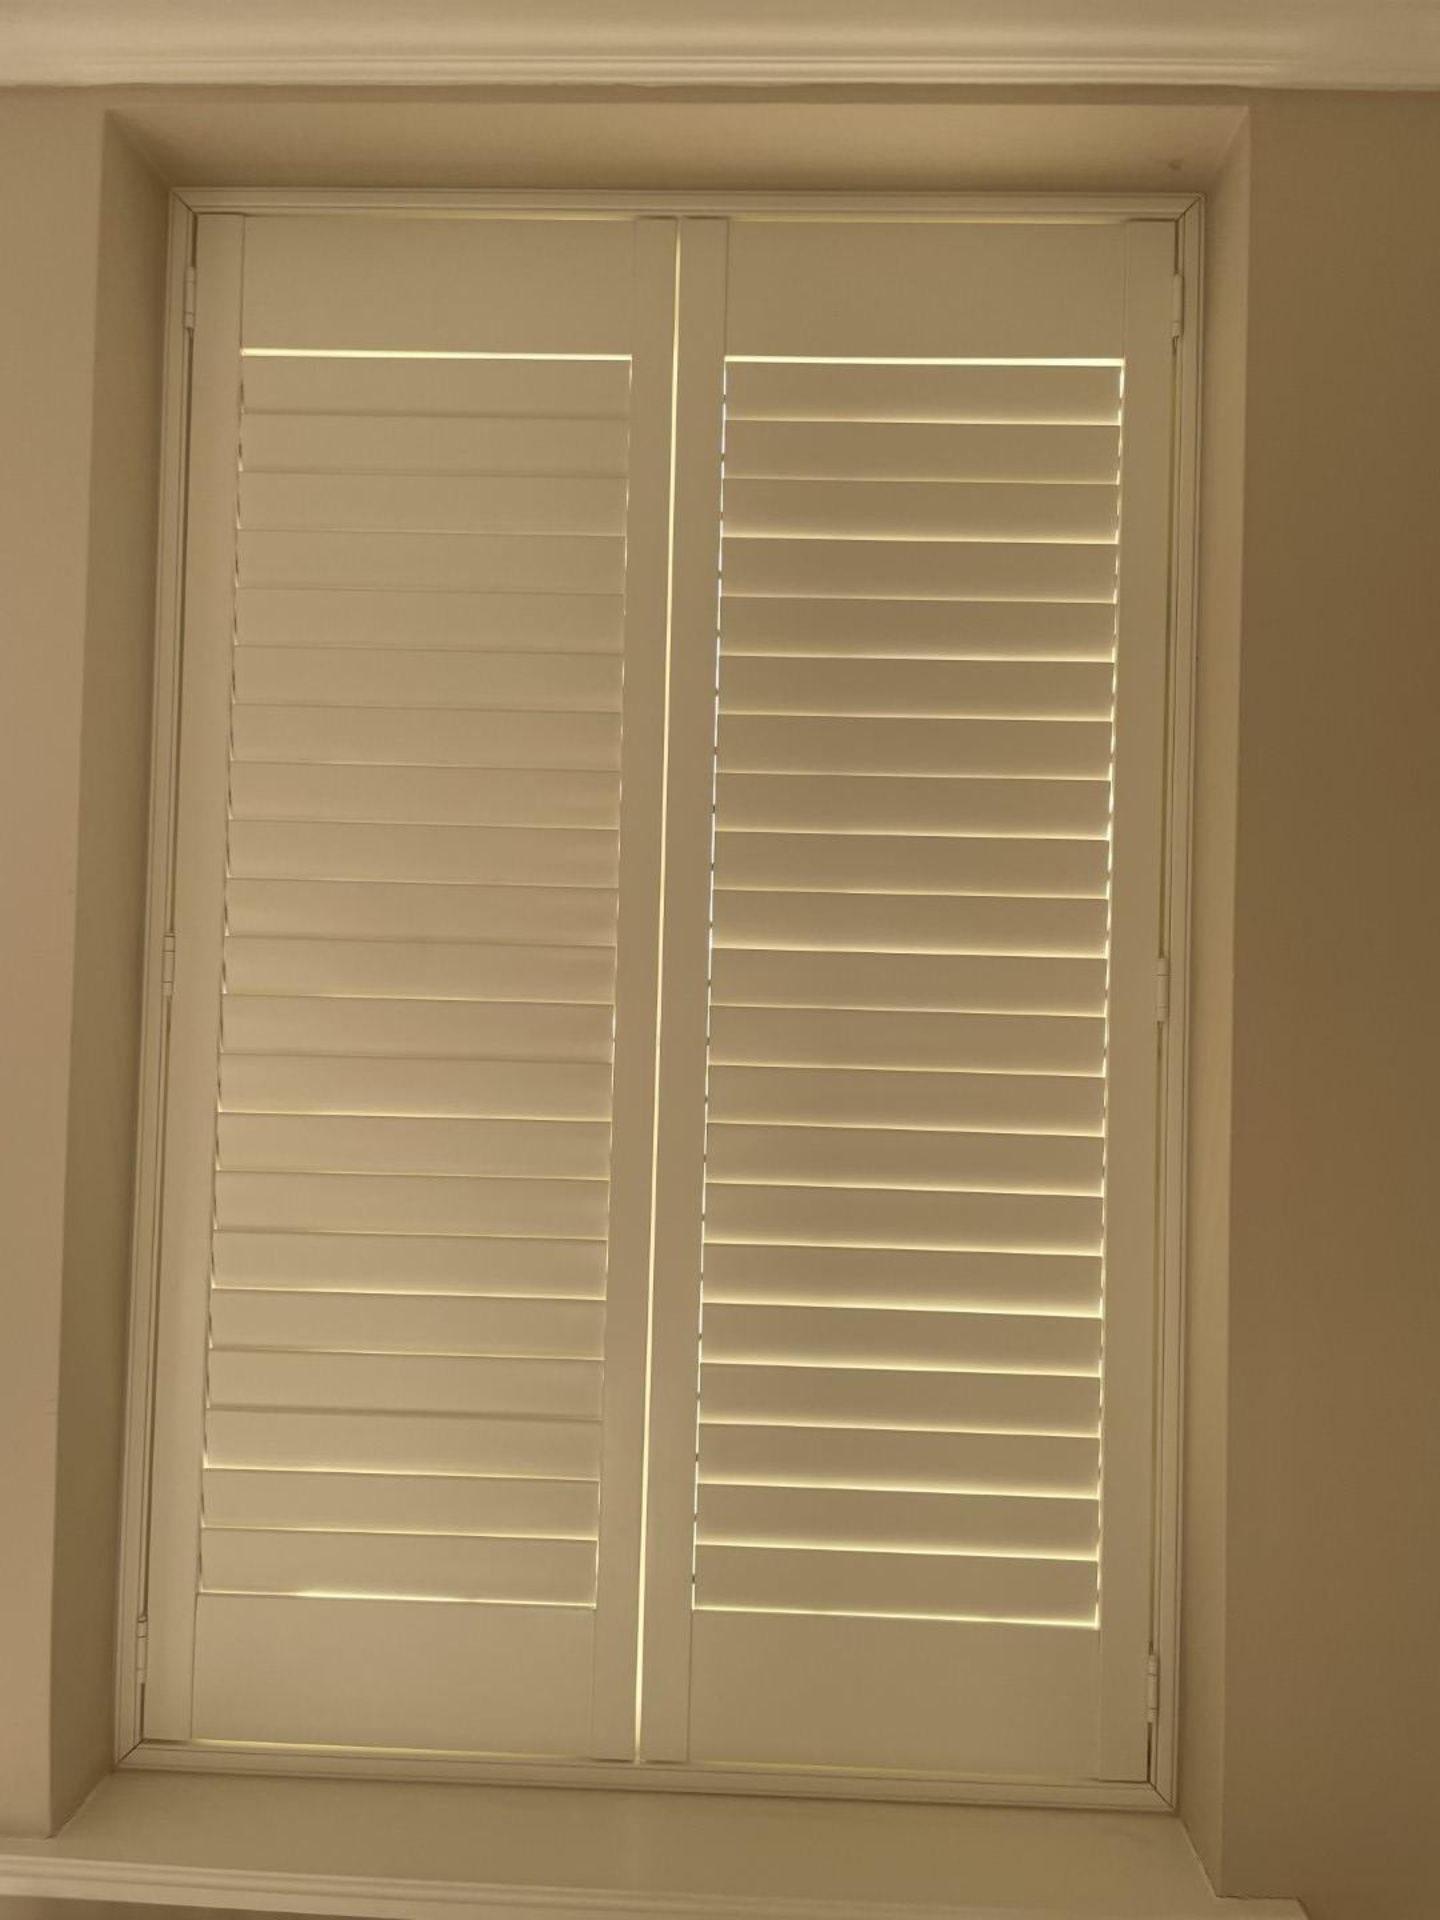 1 x Hardwood Timber Double Glazed Window Frames fitted with Shutter Blinds, In White - Ref: PAN108 - Image 18 of 19